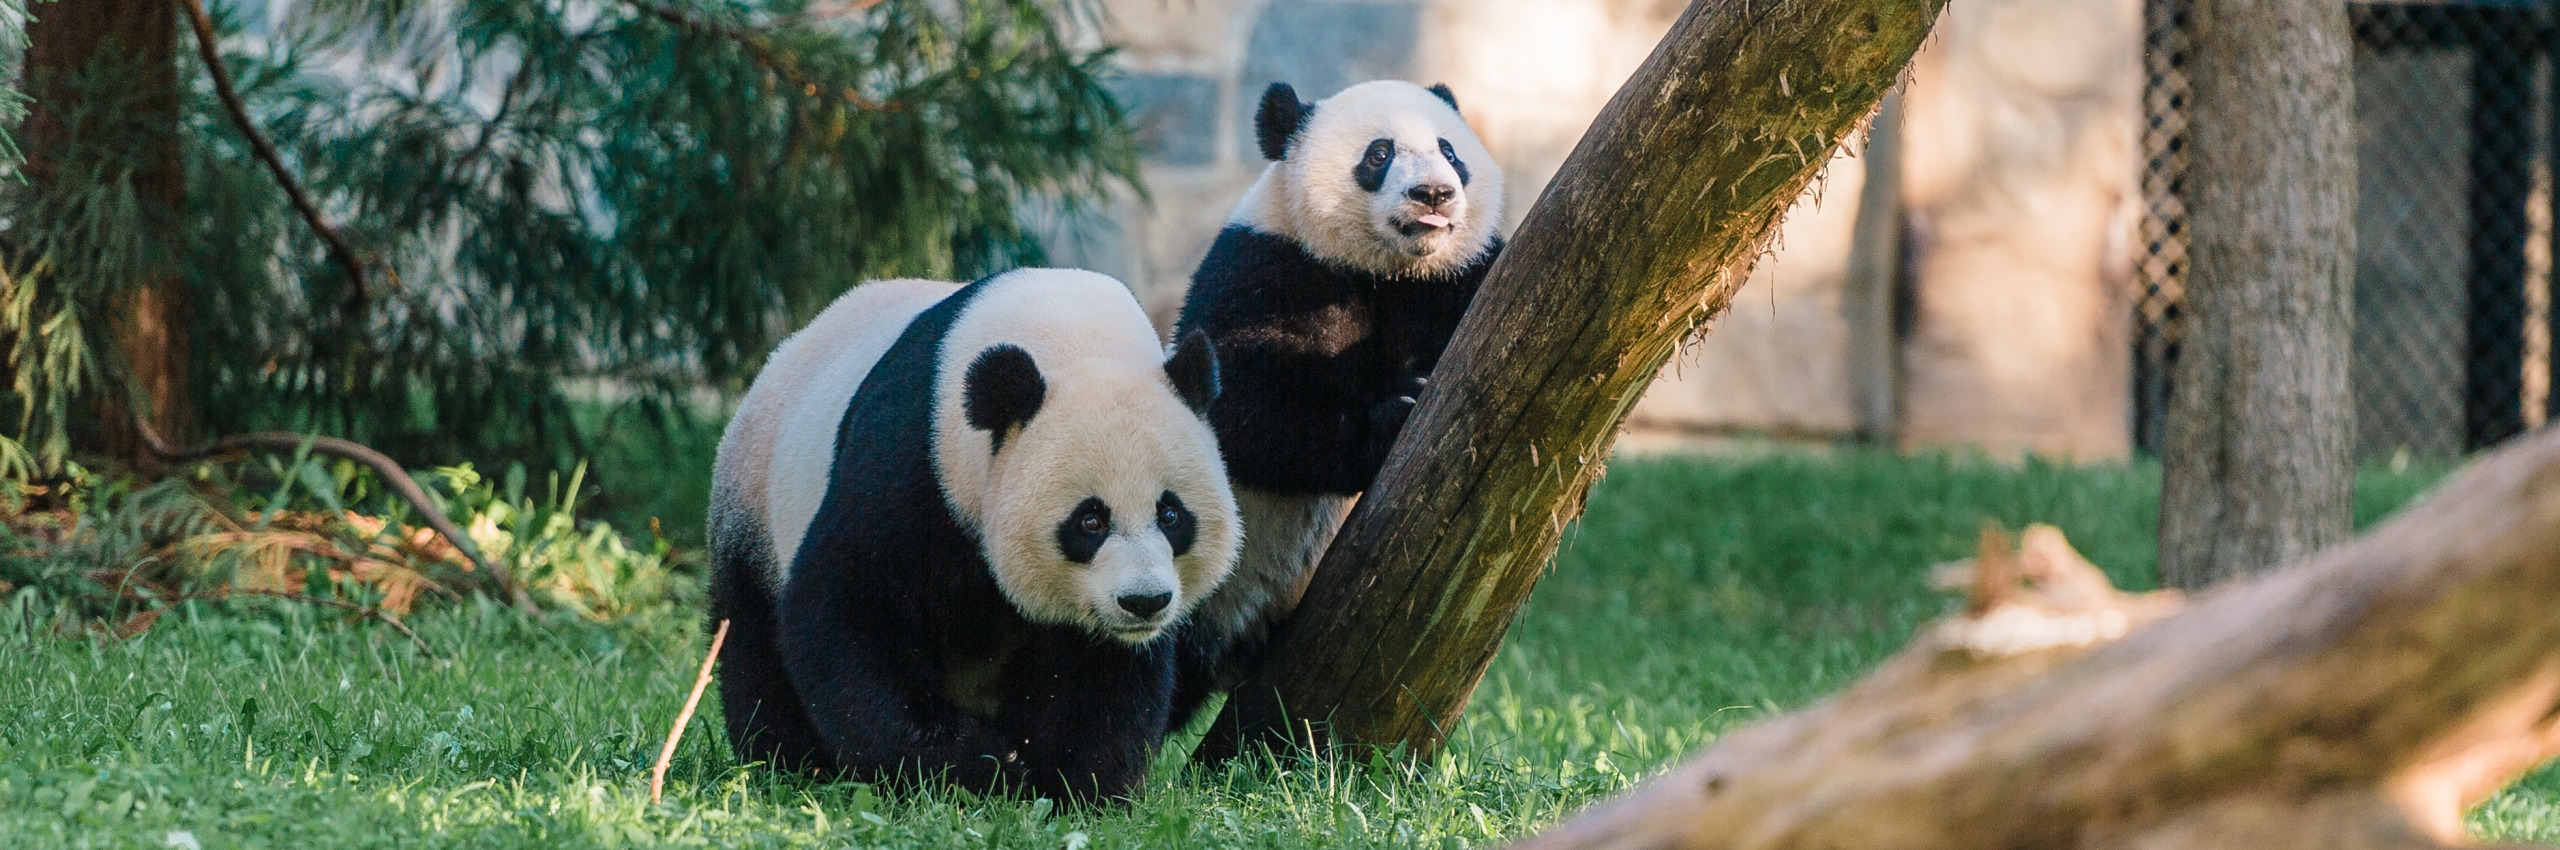 Two giant pandas play on grass.